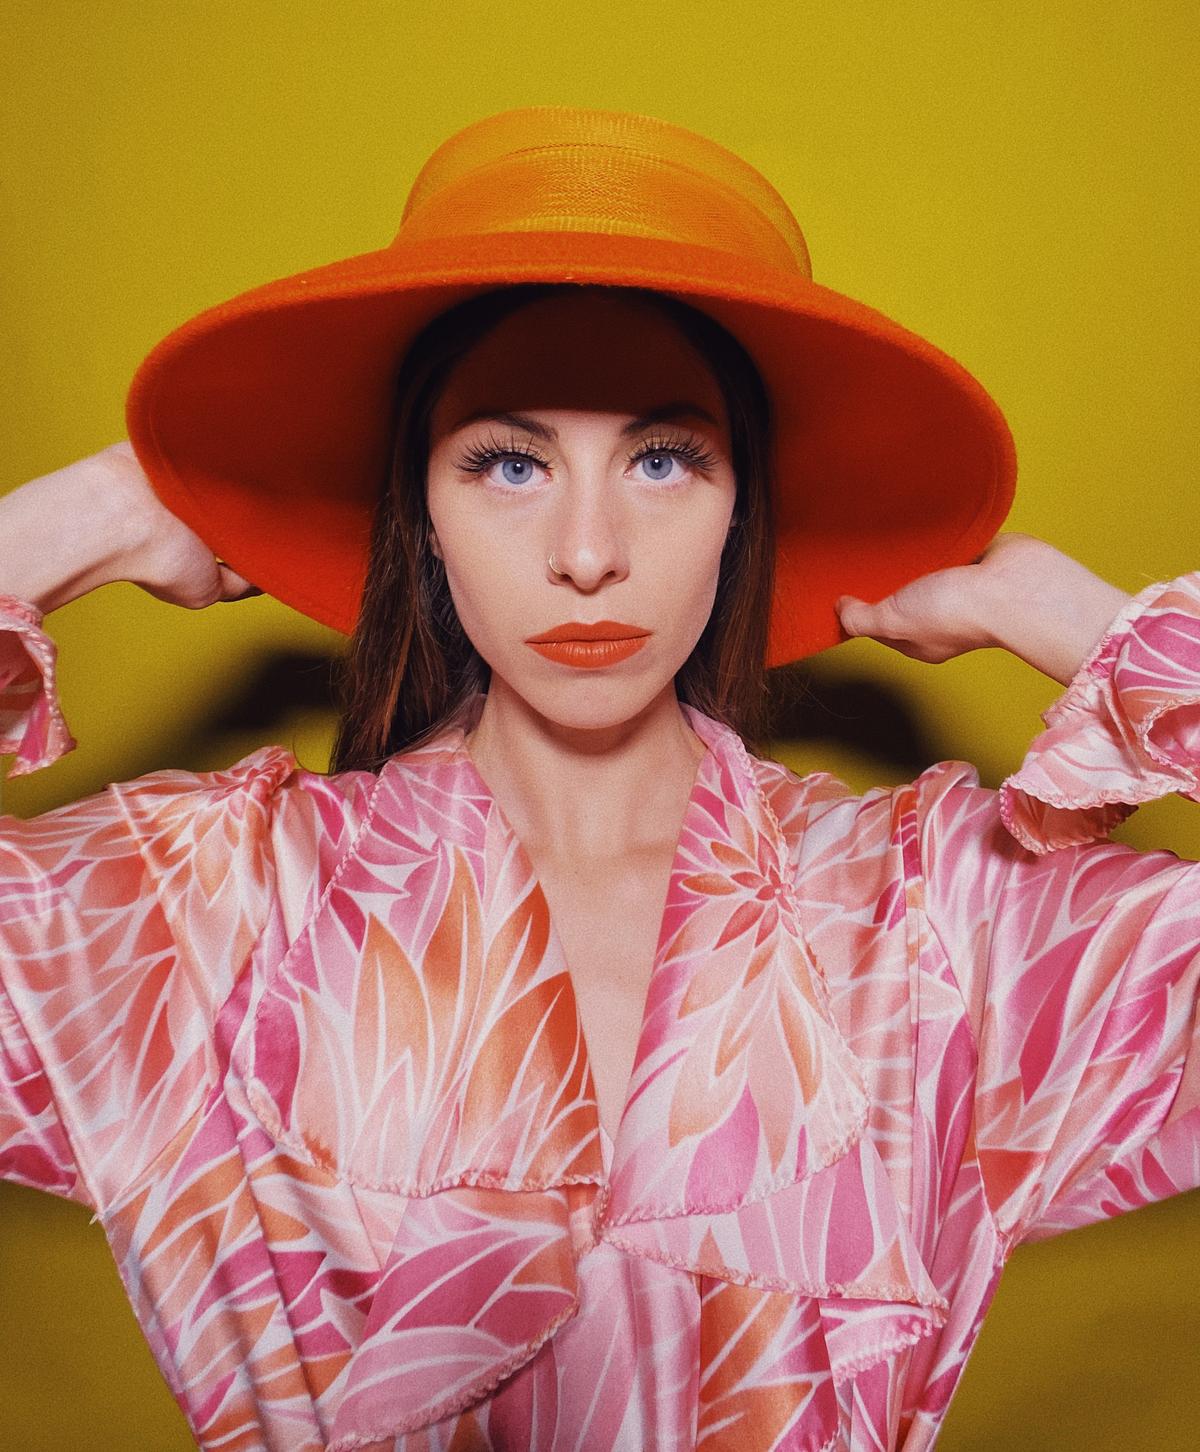 iPhone 11 - Portrait of young woman wearing pink robe and orange hat.